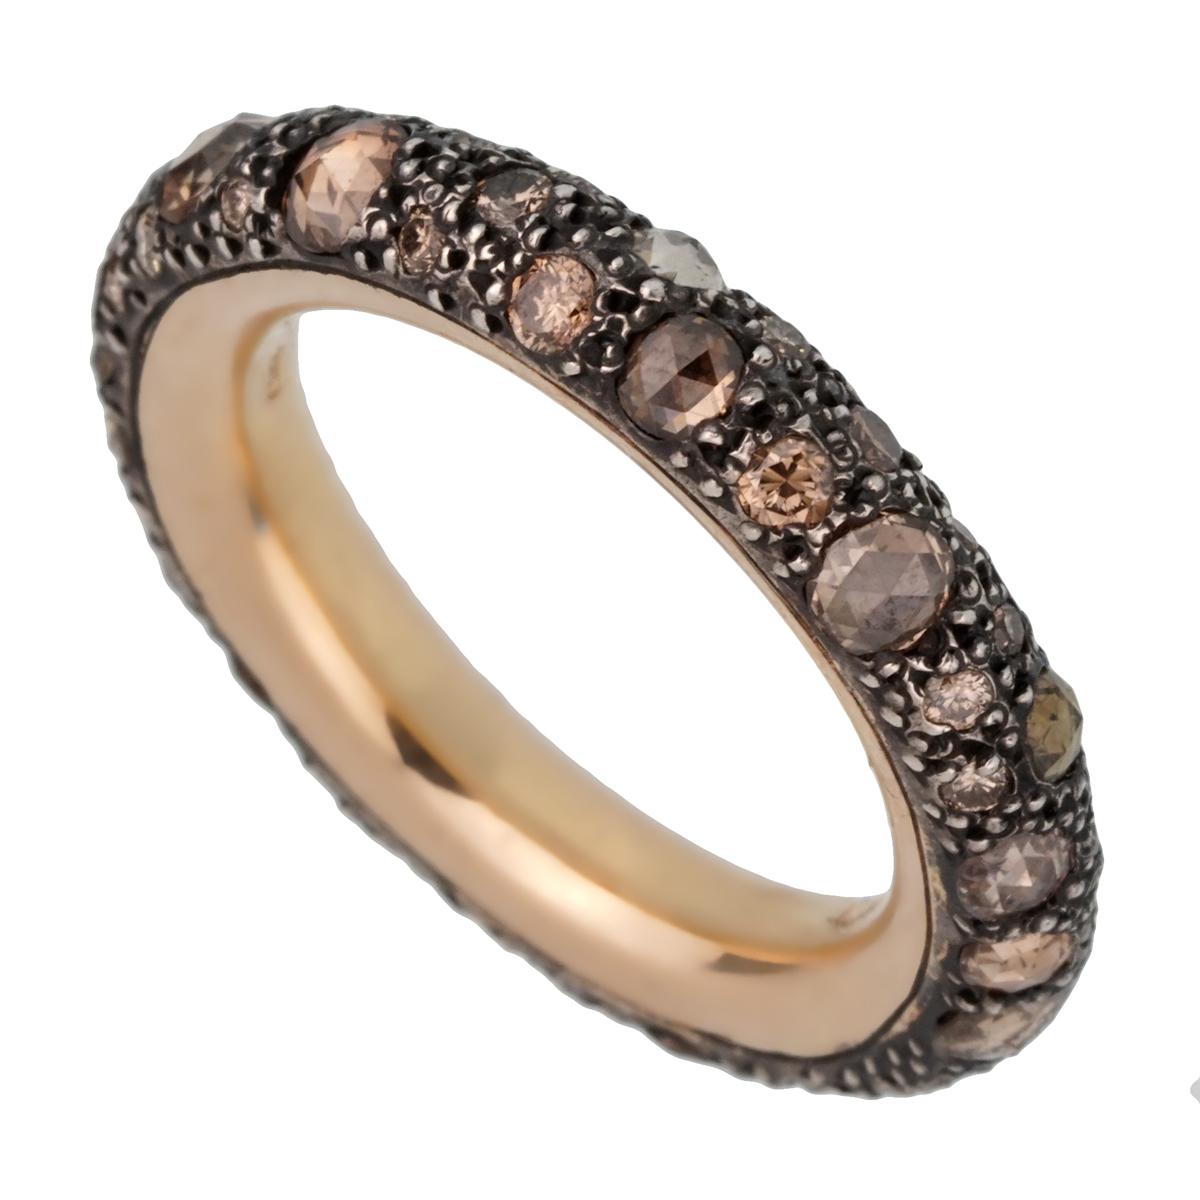 A magnificent Pomellato eternity diamond ring showcasing 1.91ct of rose gold champagne diamonds in shimmering 18k rose gold. The ring measures a size 6 1/4

Pomellato Retail Price: $8100
Sku: 2471
